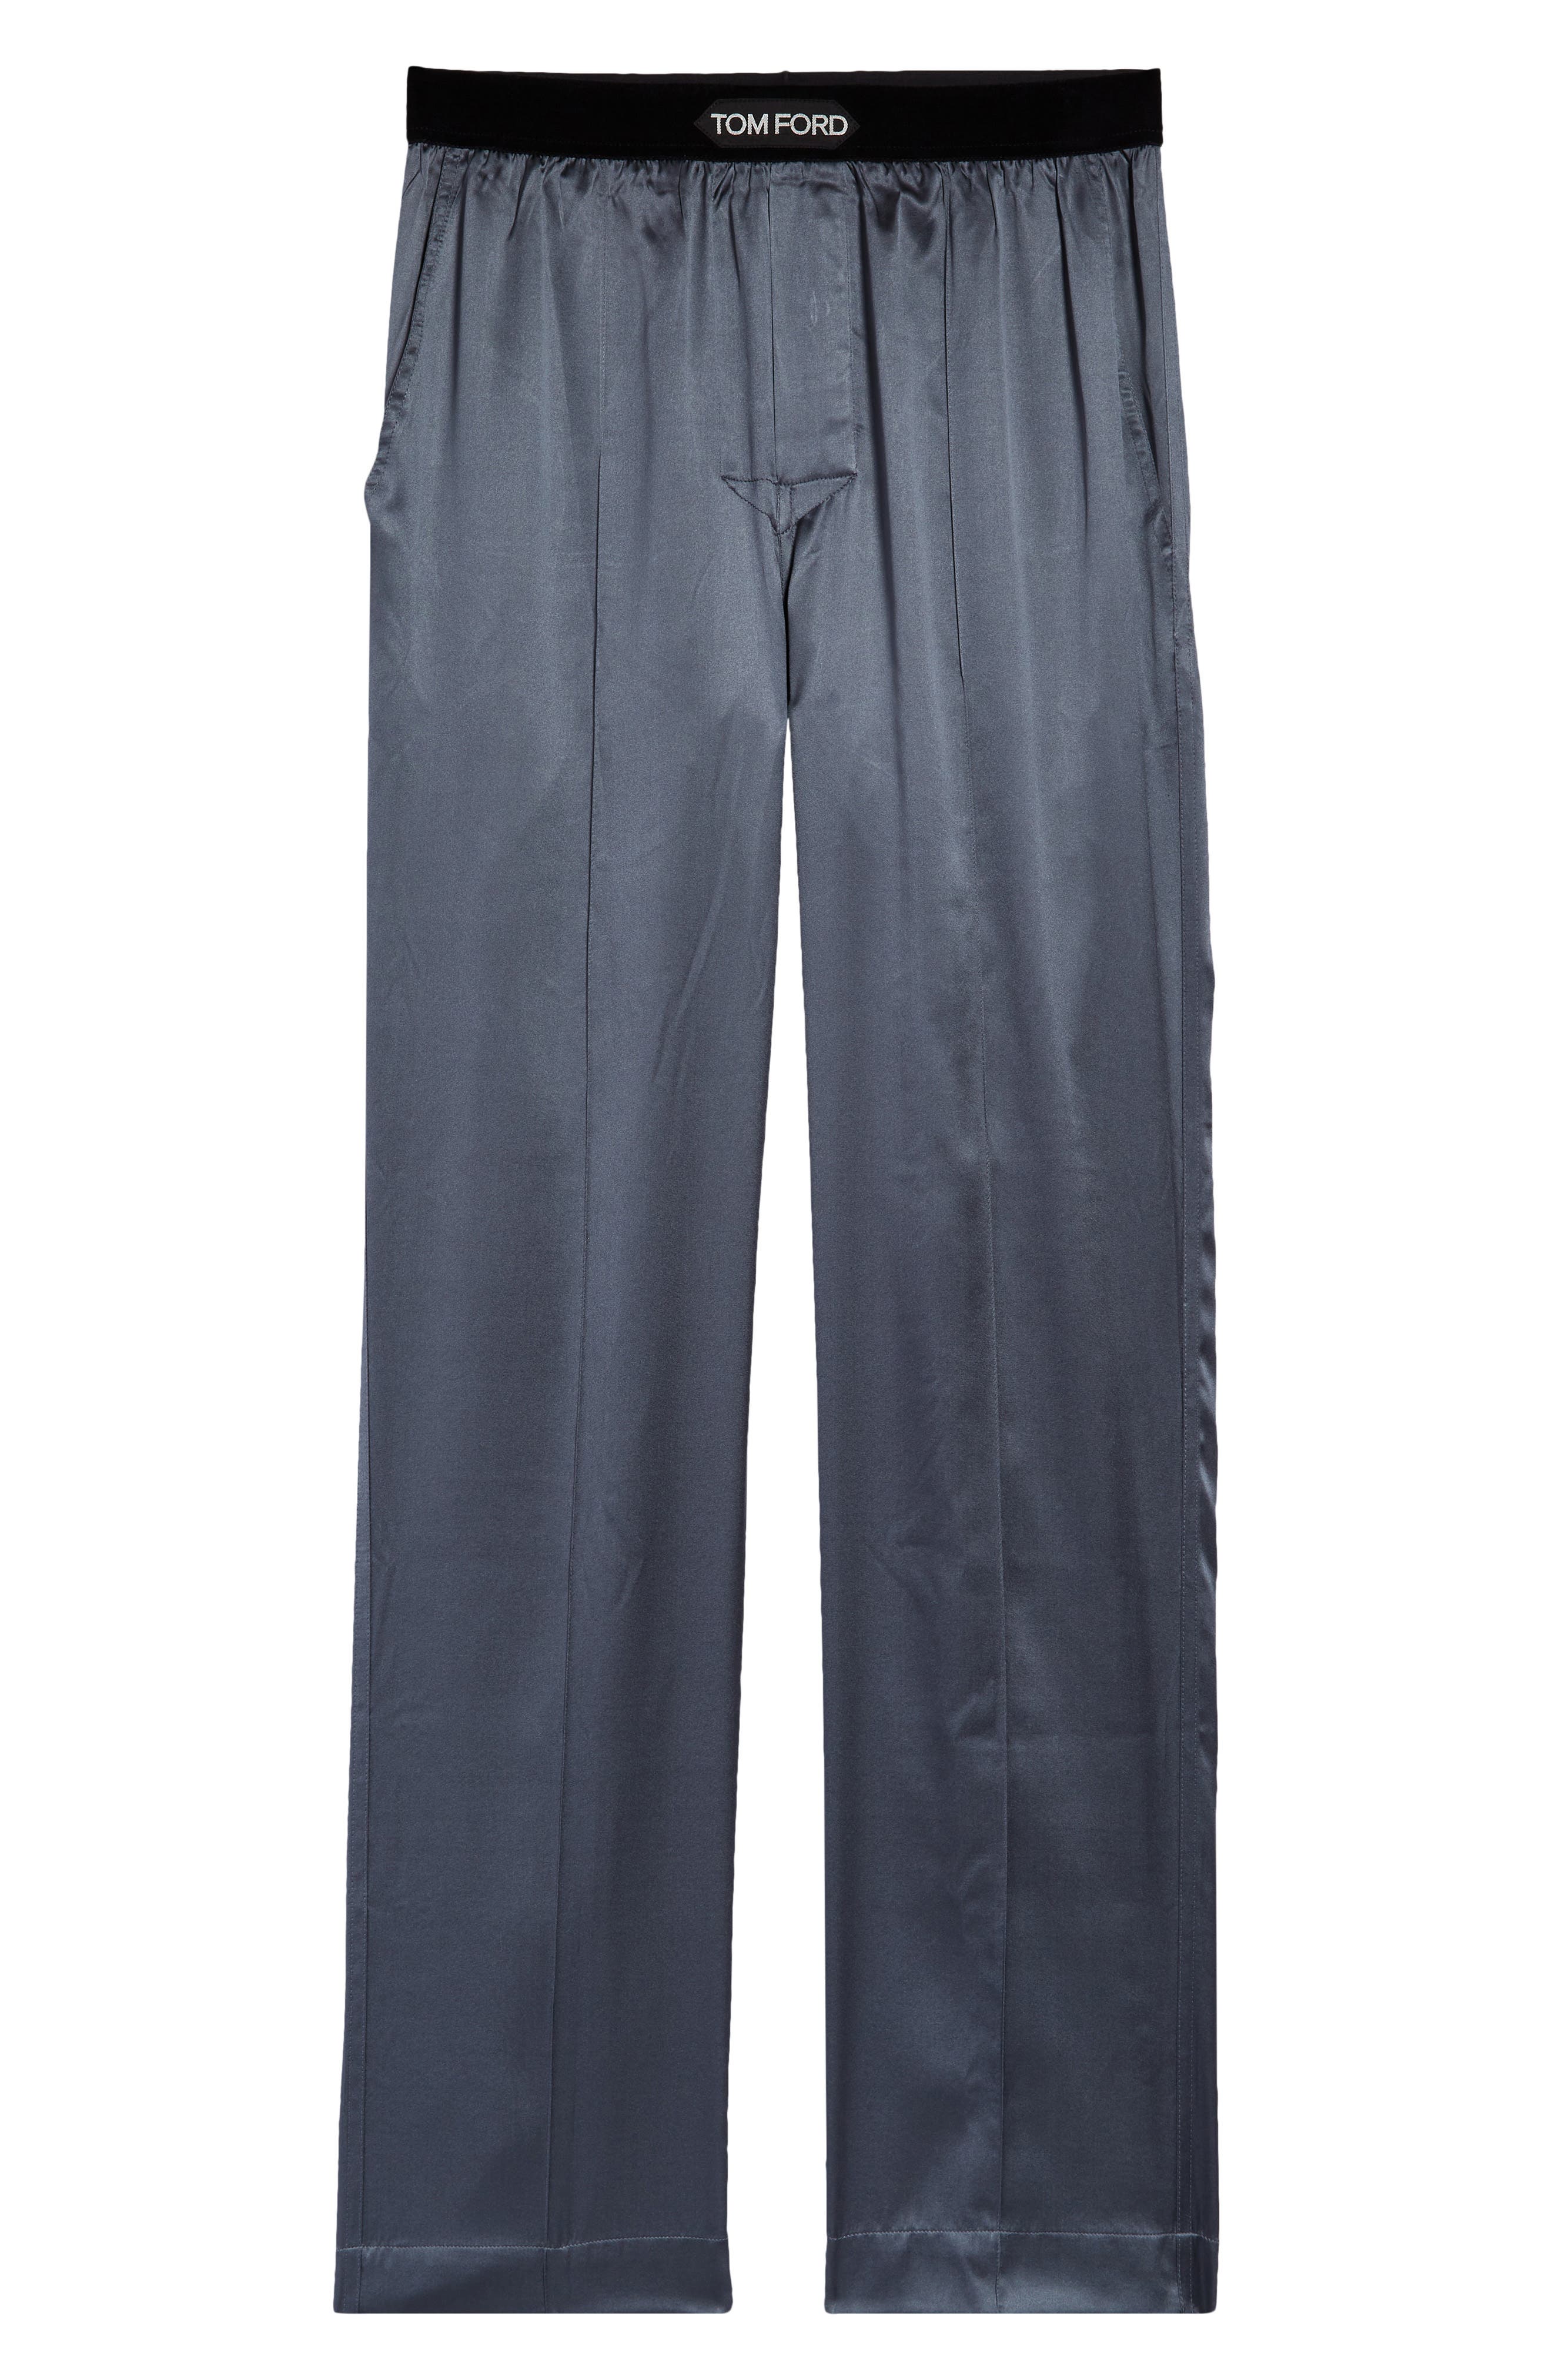 Tom Ford Stretch Silk Pajama Pants in Dark Grey at Nordstrom, Size Small